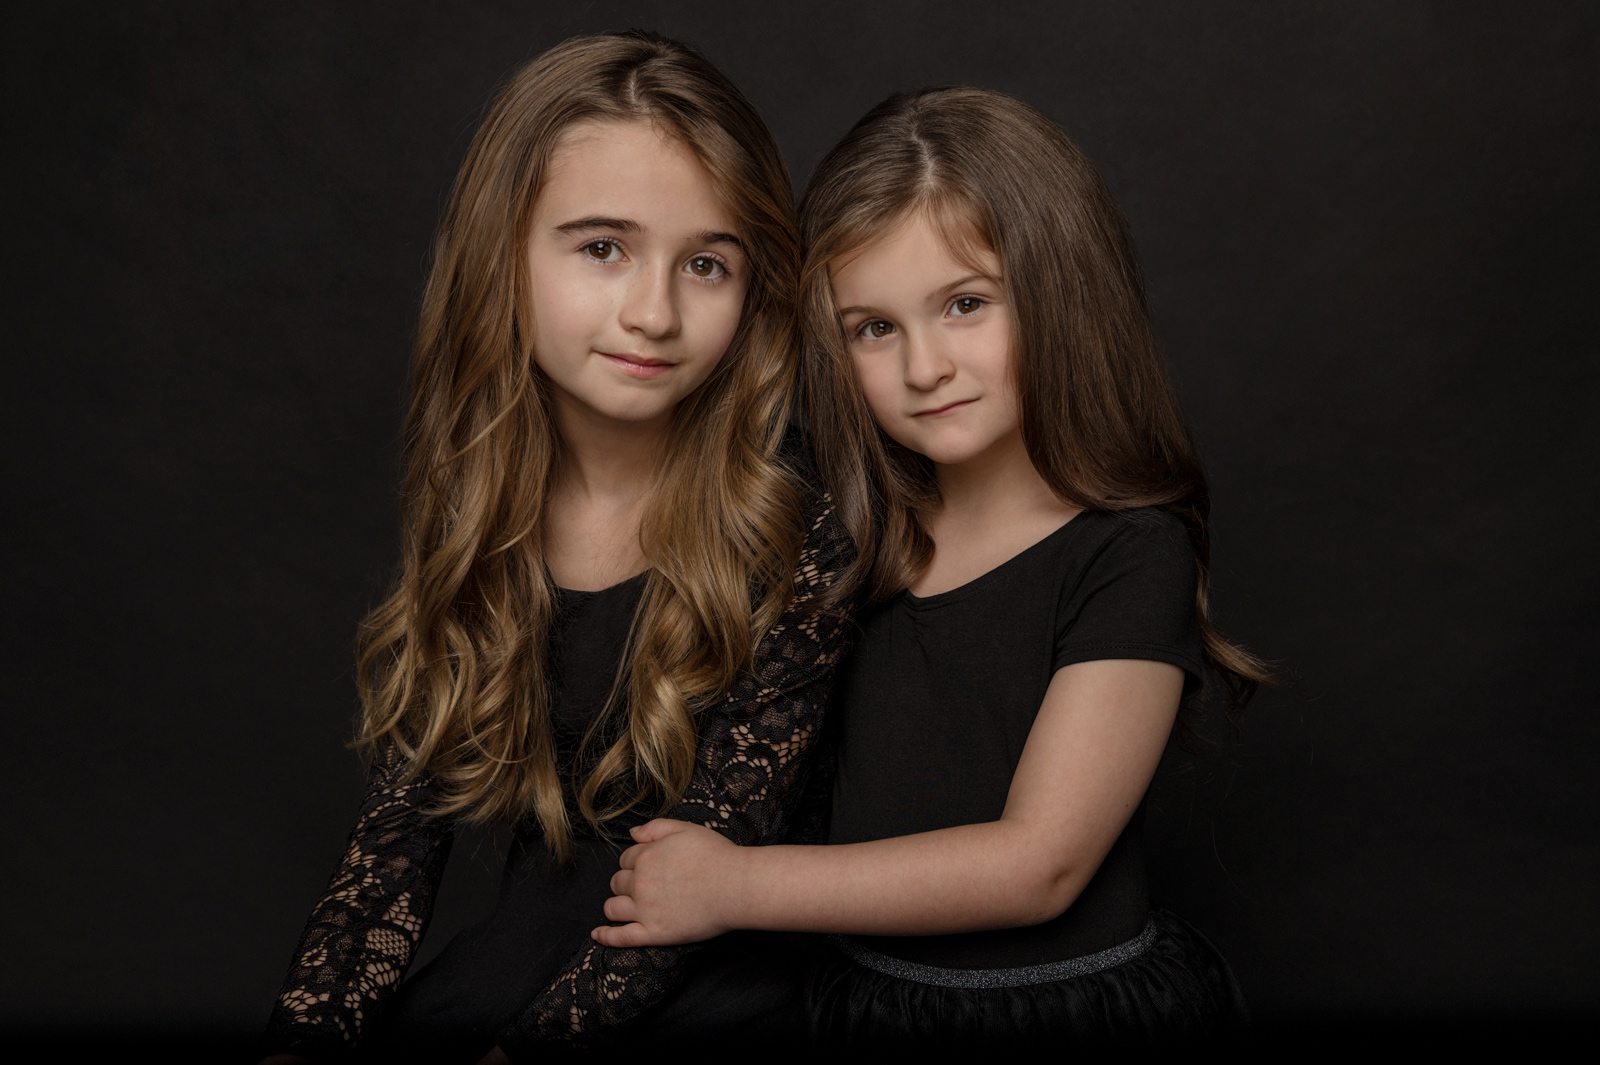 Childrens photography in studio portraits of two girls Vancouver BC